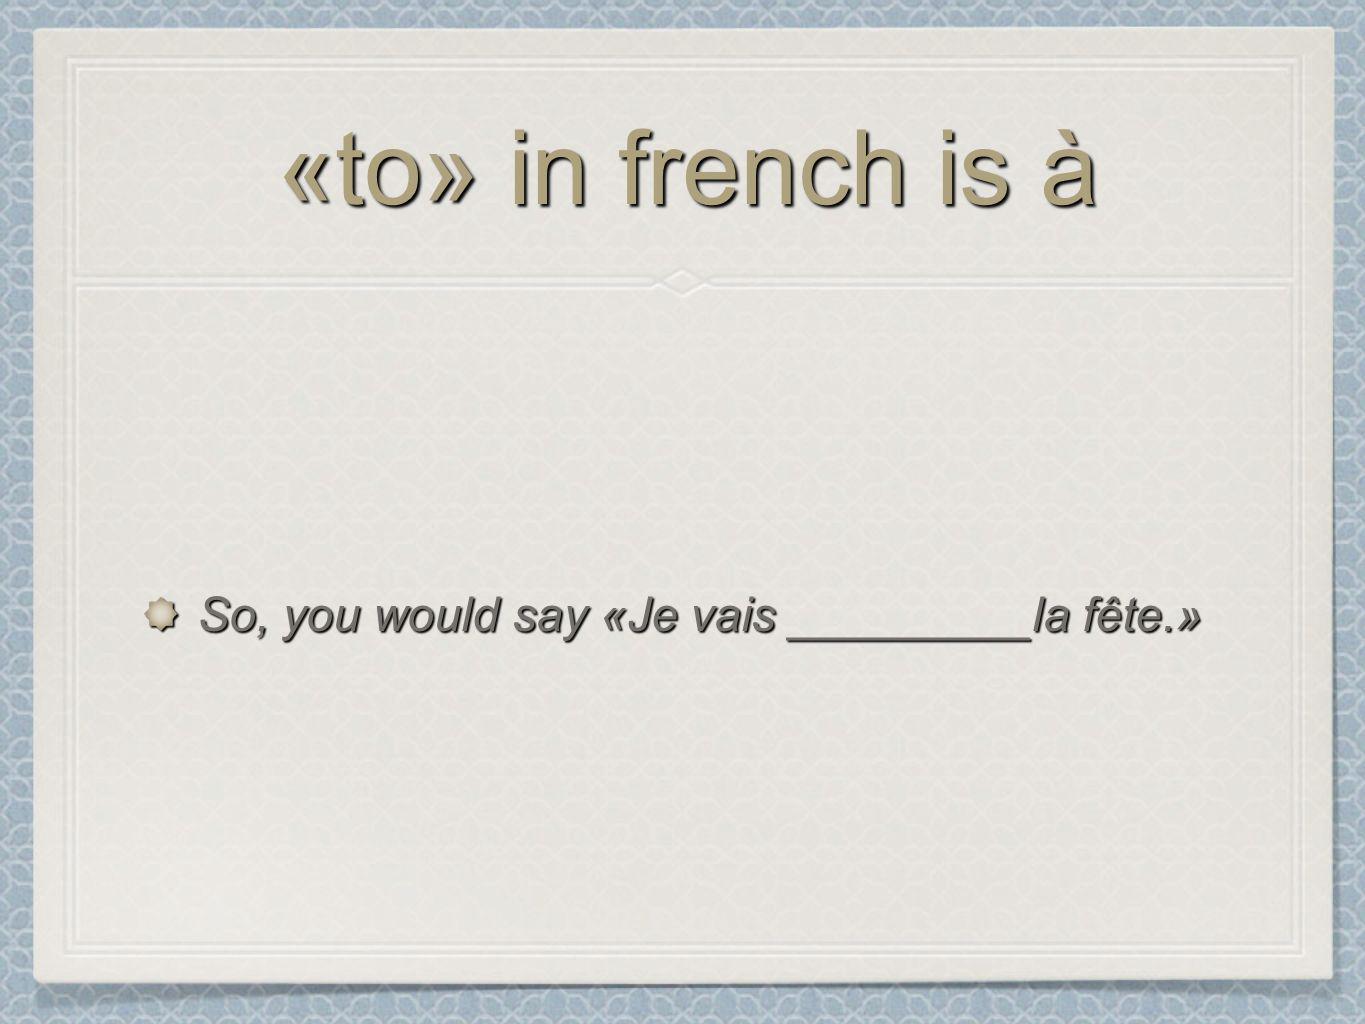 «to» in french is à So, you would say «Je vais _________la fête.»